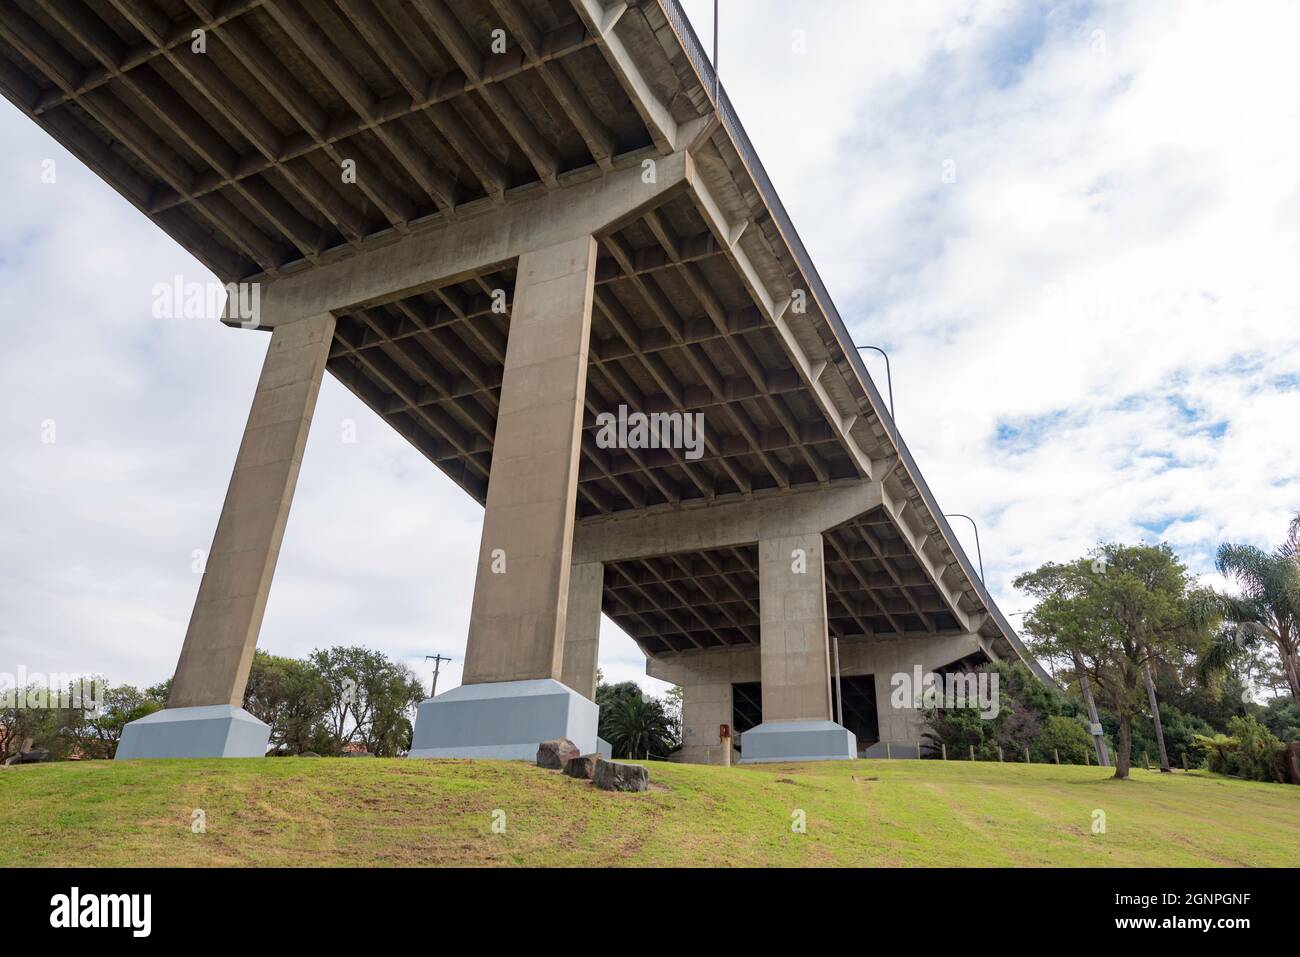 Gladesville Bridge is a heritage listed concrete arch road bridge completed in 1964, it was the longest single span concrete arch ever constructed. Stock Photo